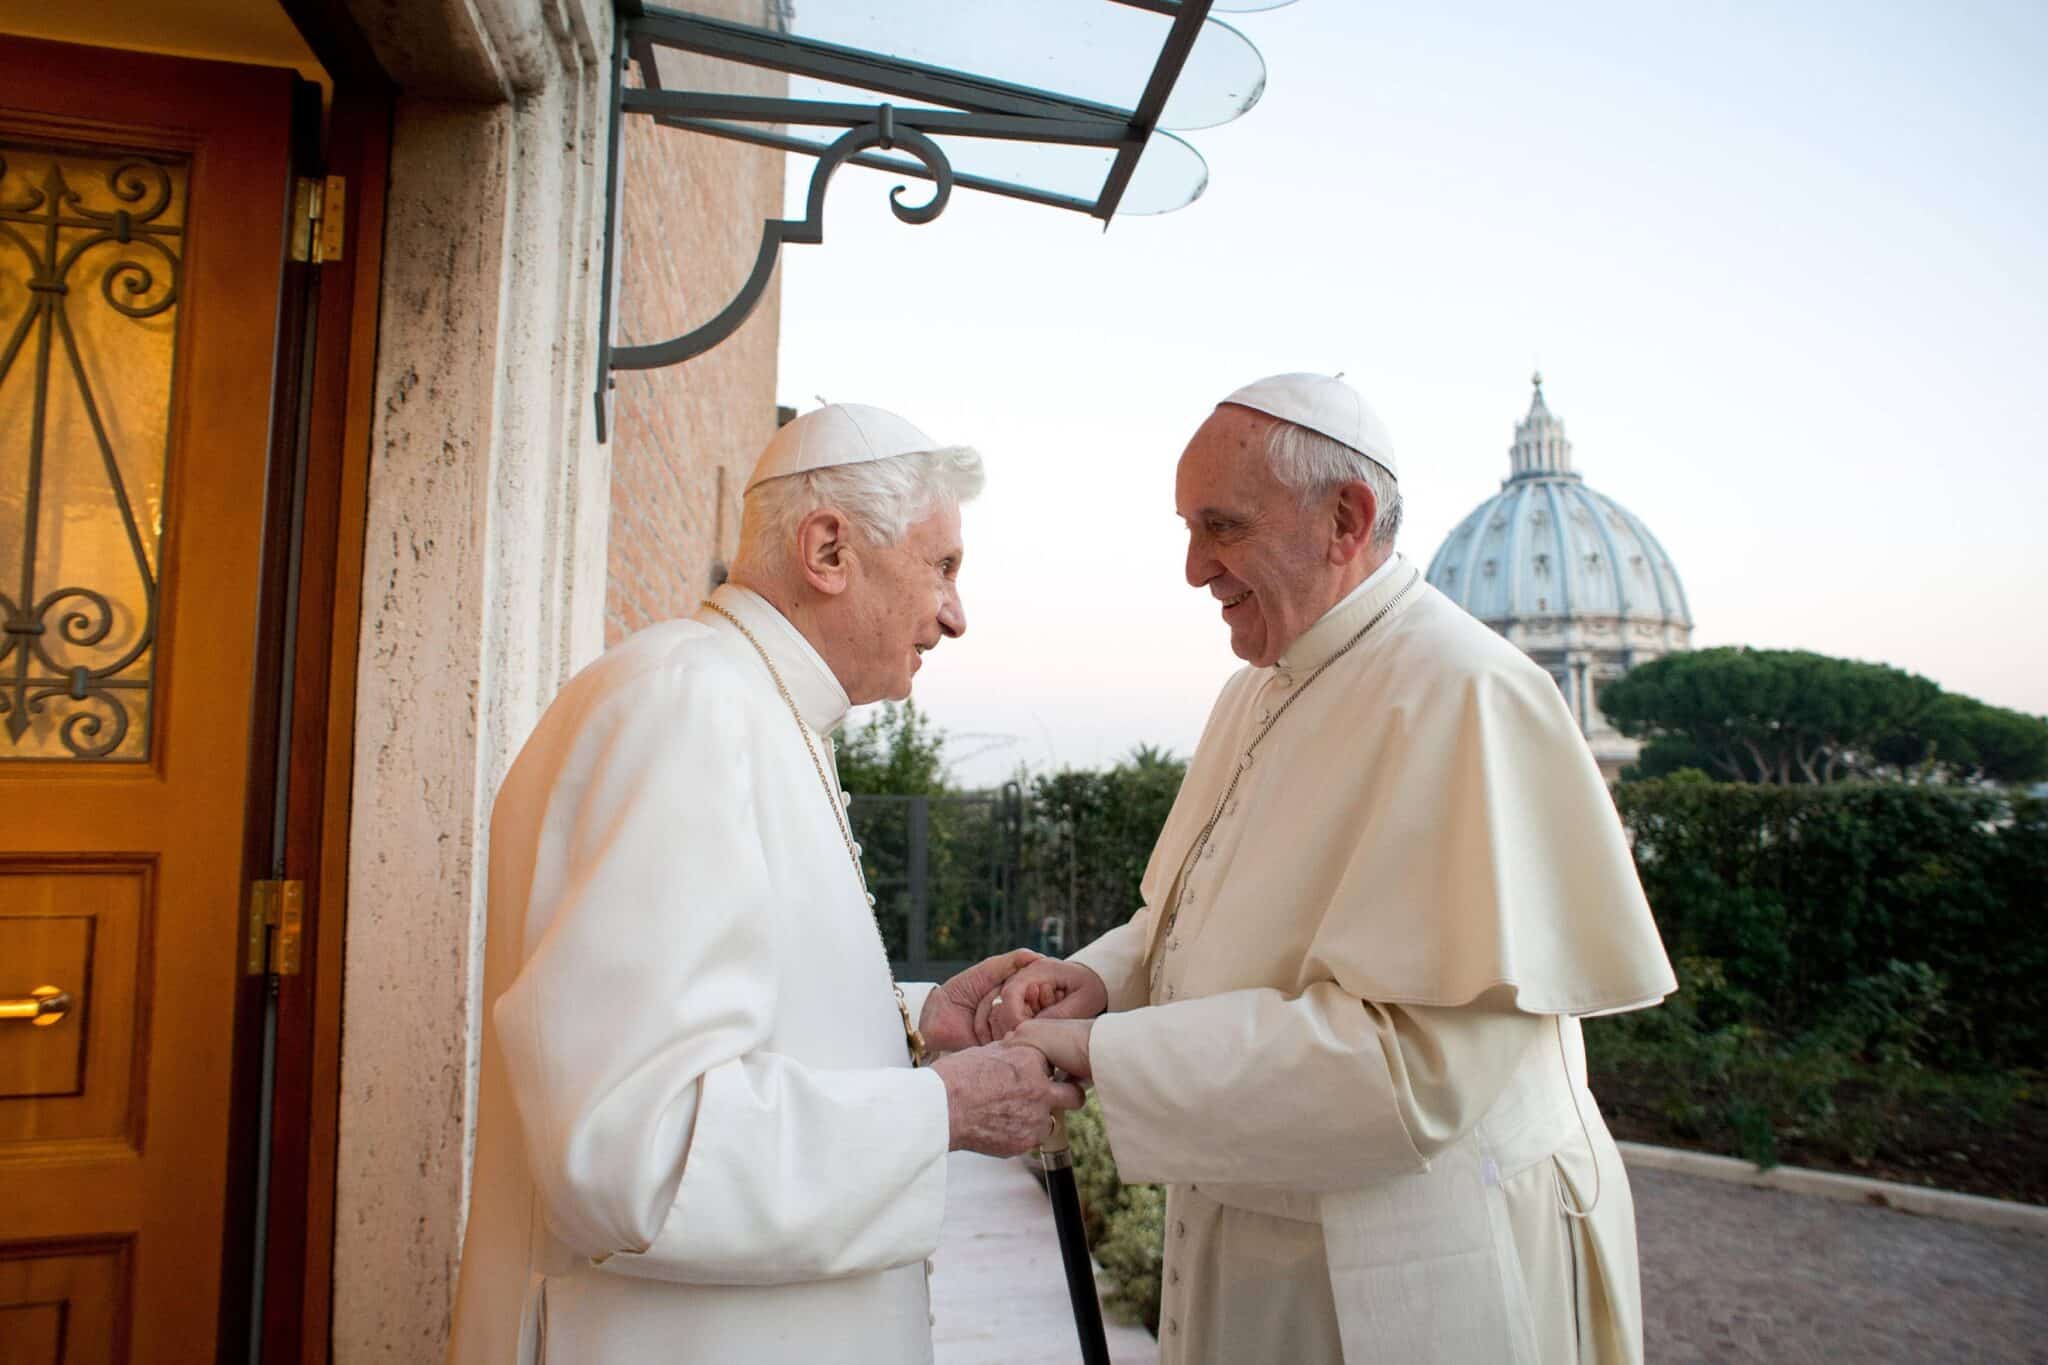 Pope Francis greets retired Pope Benedict XVI at the retired pontiff's Vatican residence Dec. 23, 2013. (CNS photo/Vatican Media)